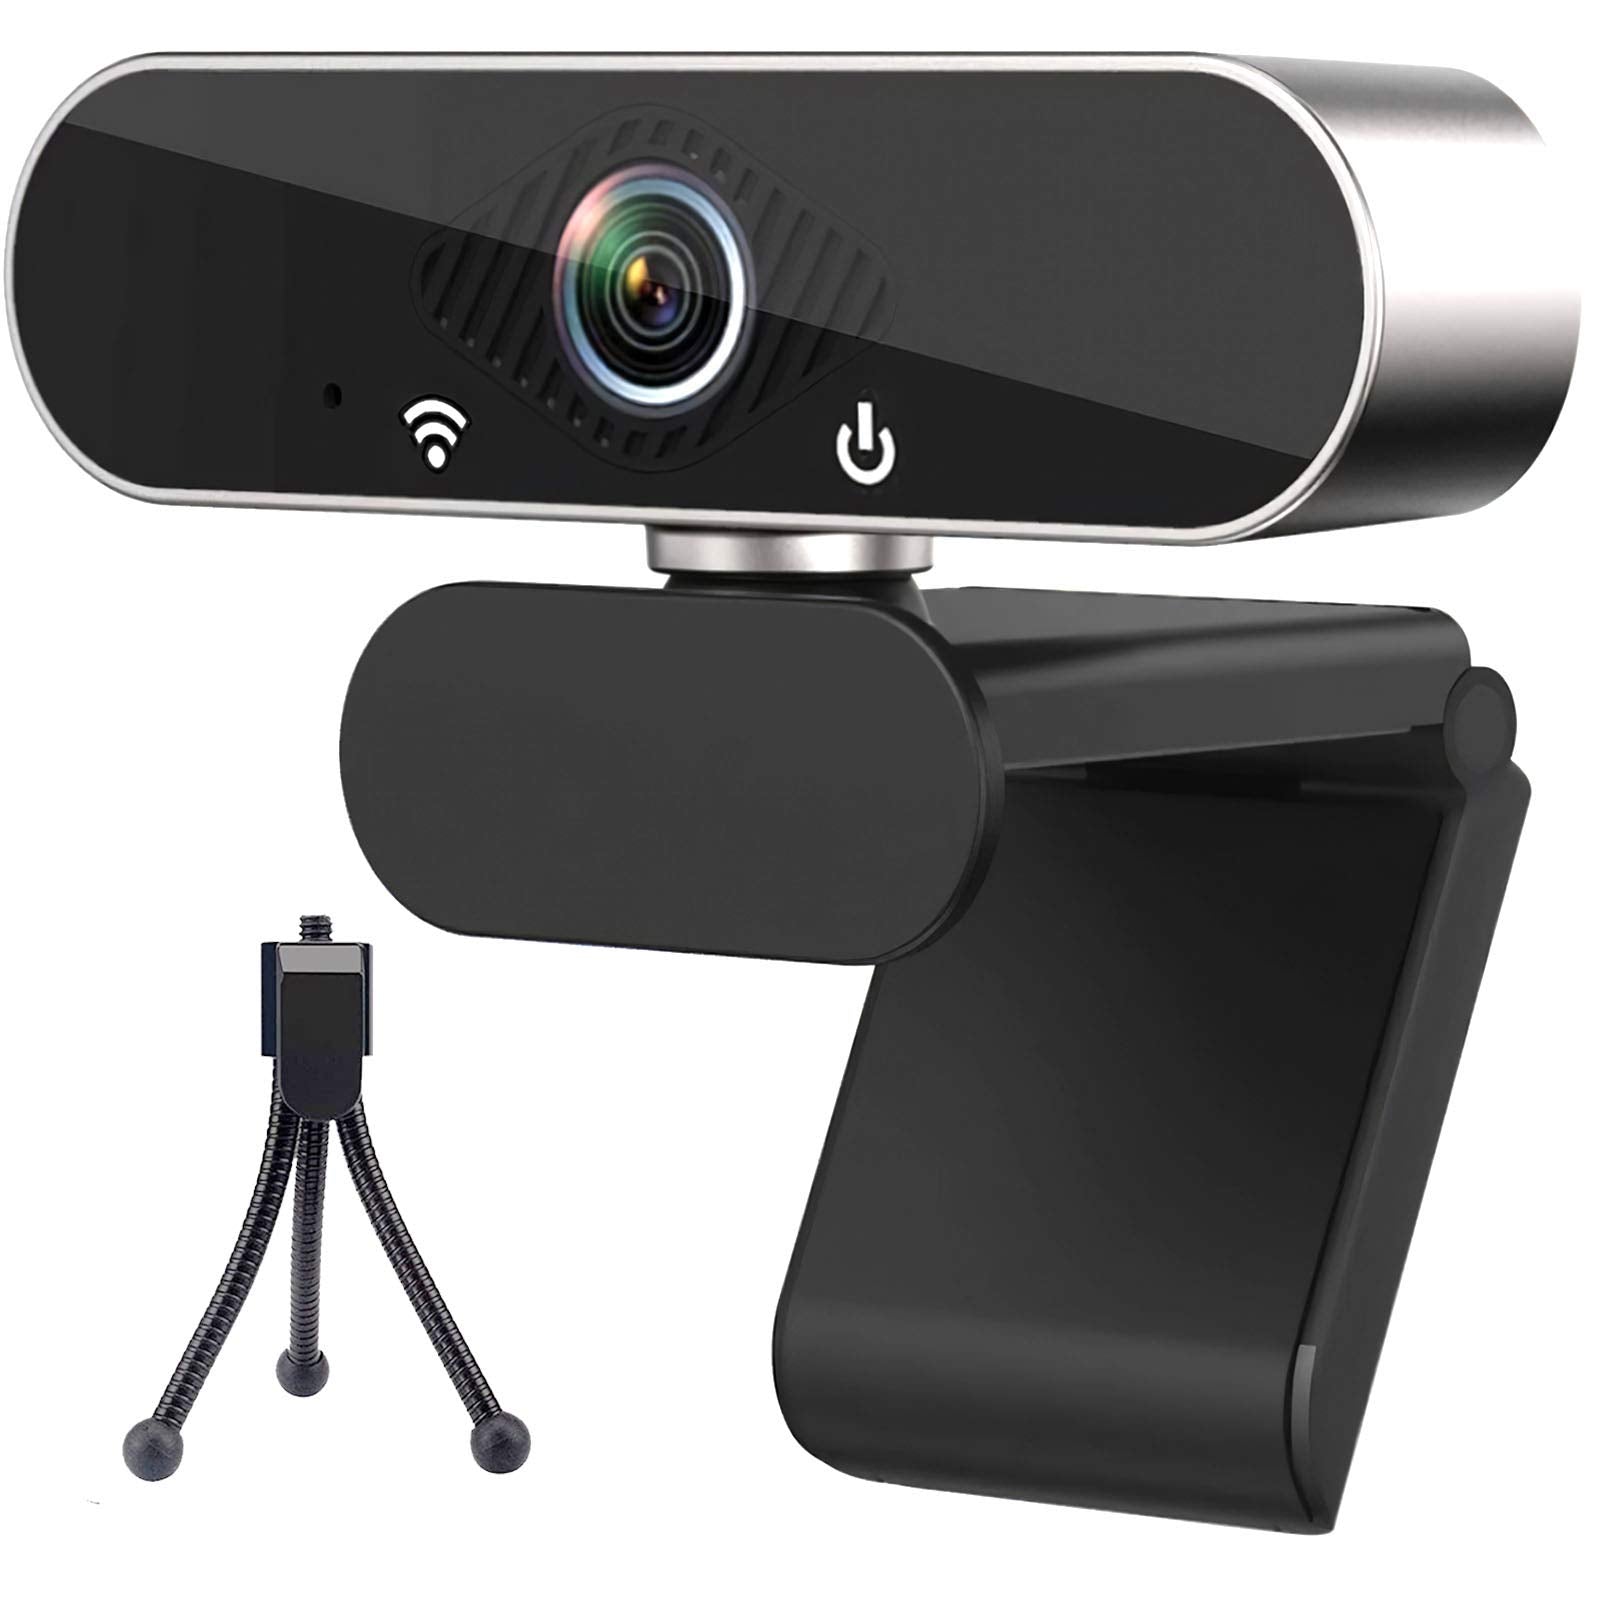 Web Cam Full HD 1080P with Microphone CAM40 